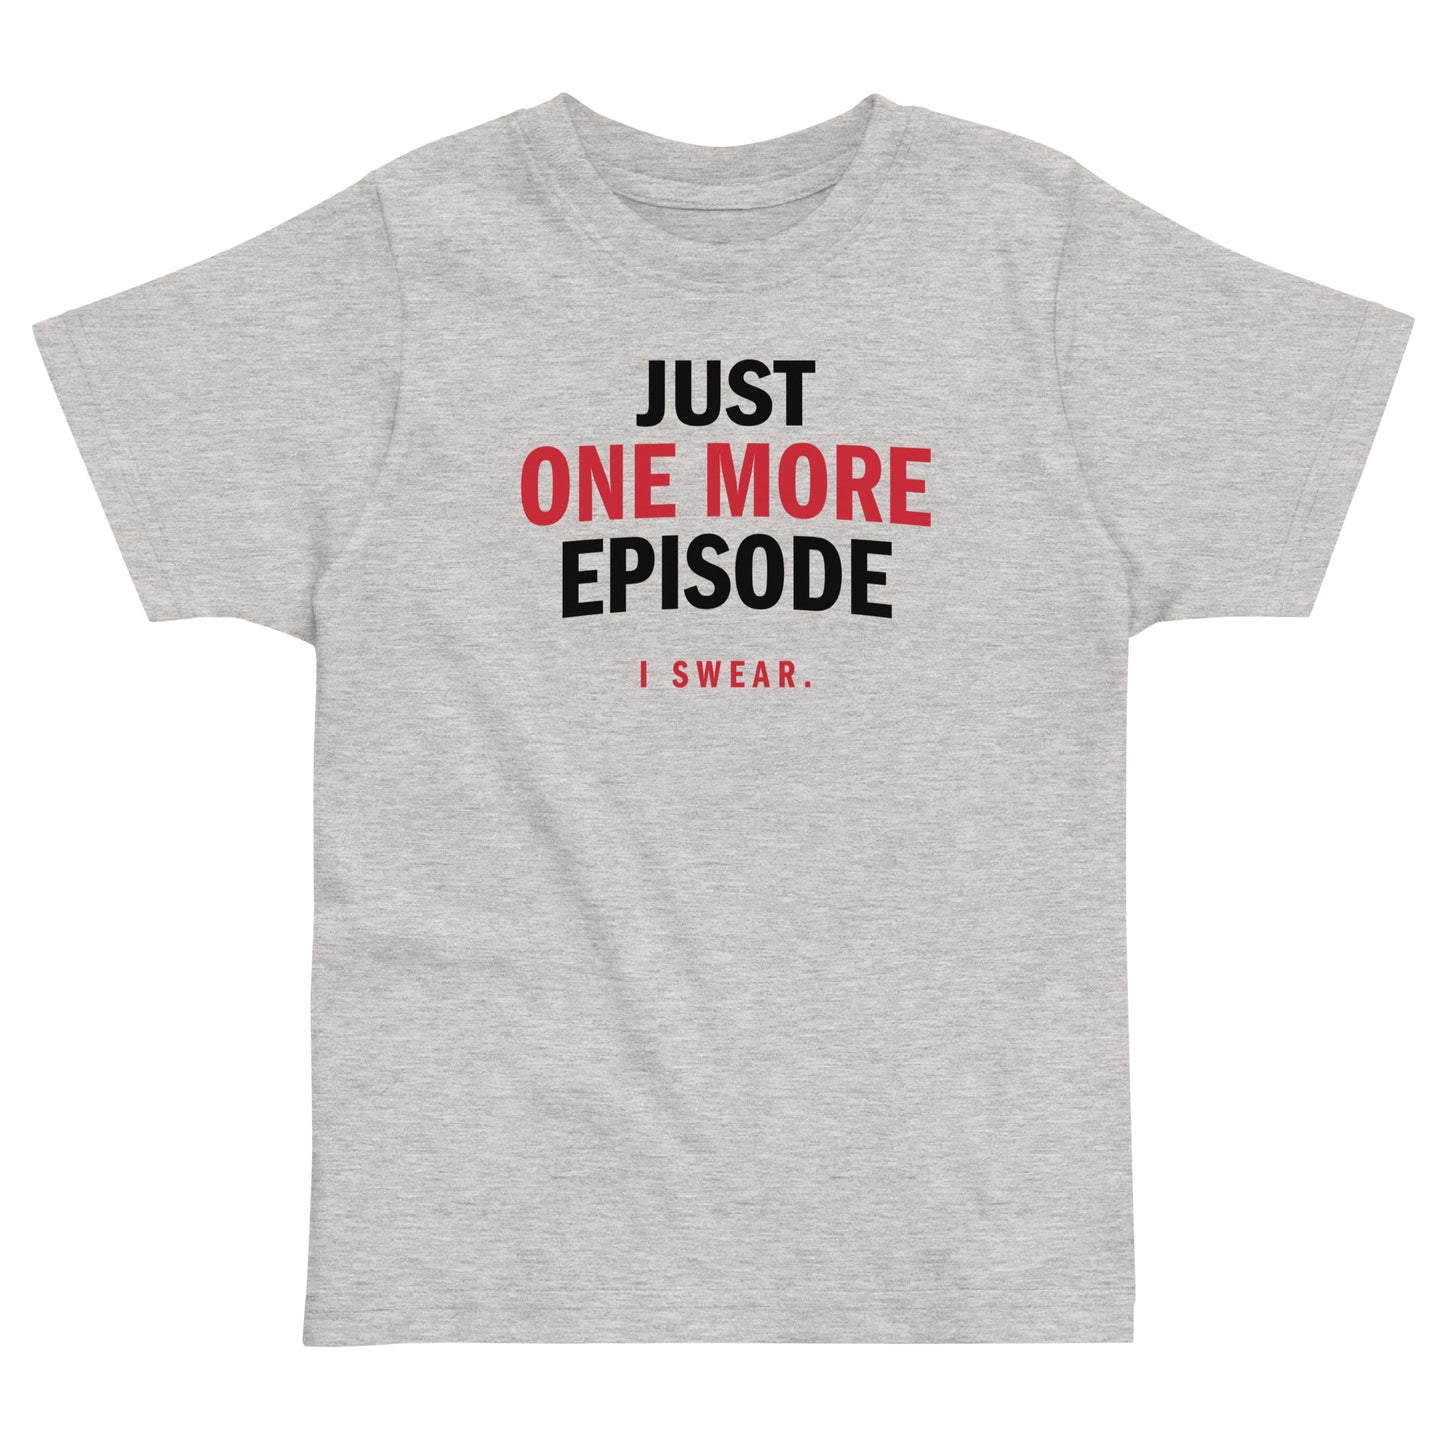 Just One More Episode Kid's Toddler Tee